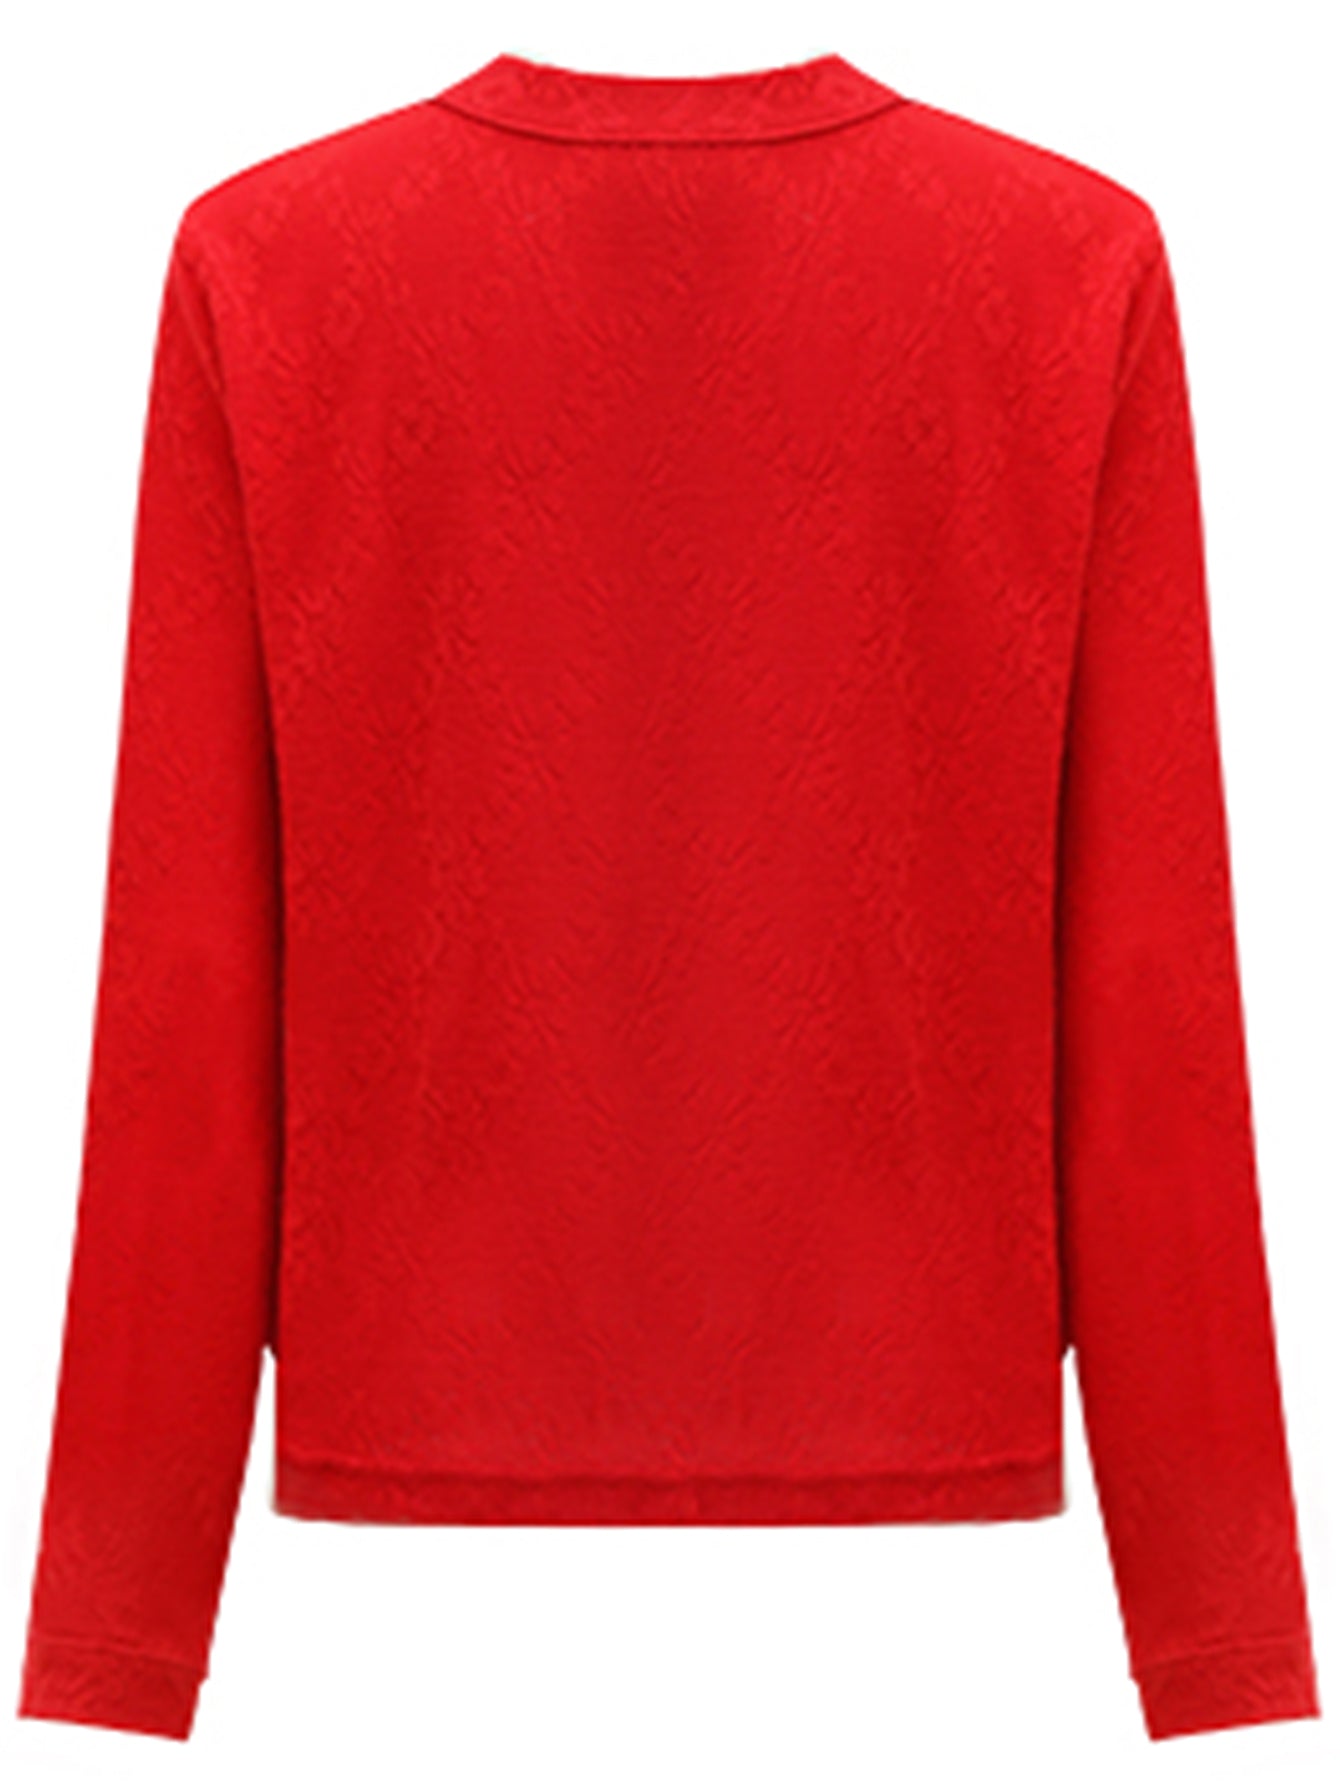 stylish-red-cardigan-with-gold-snap-buttons_all_red_5.jpg